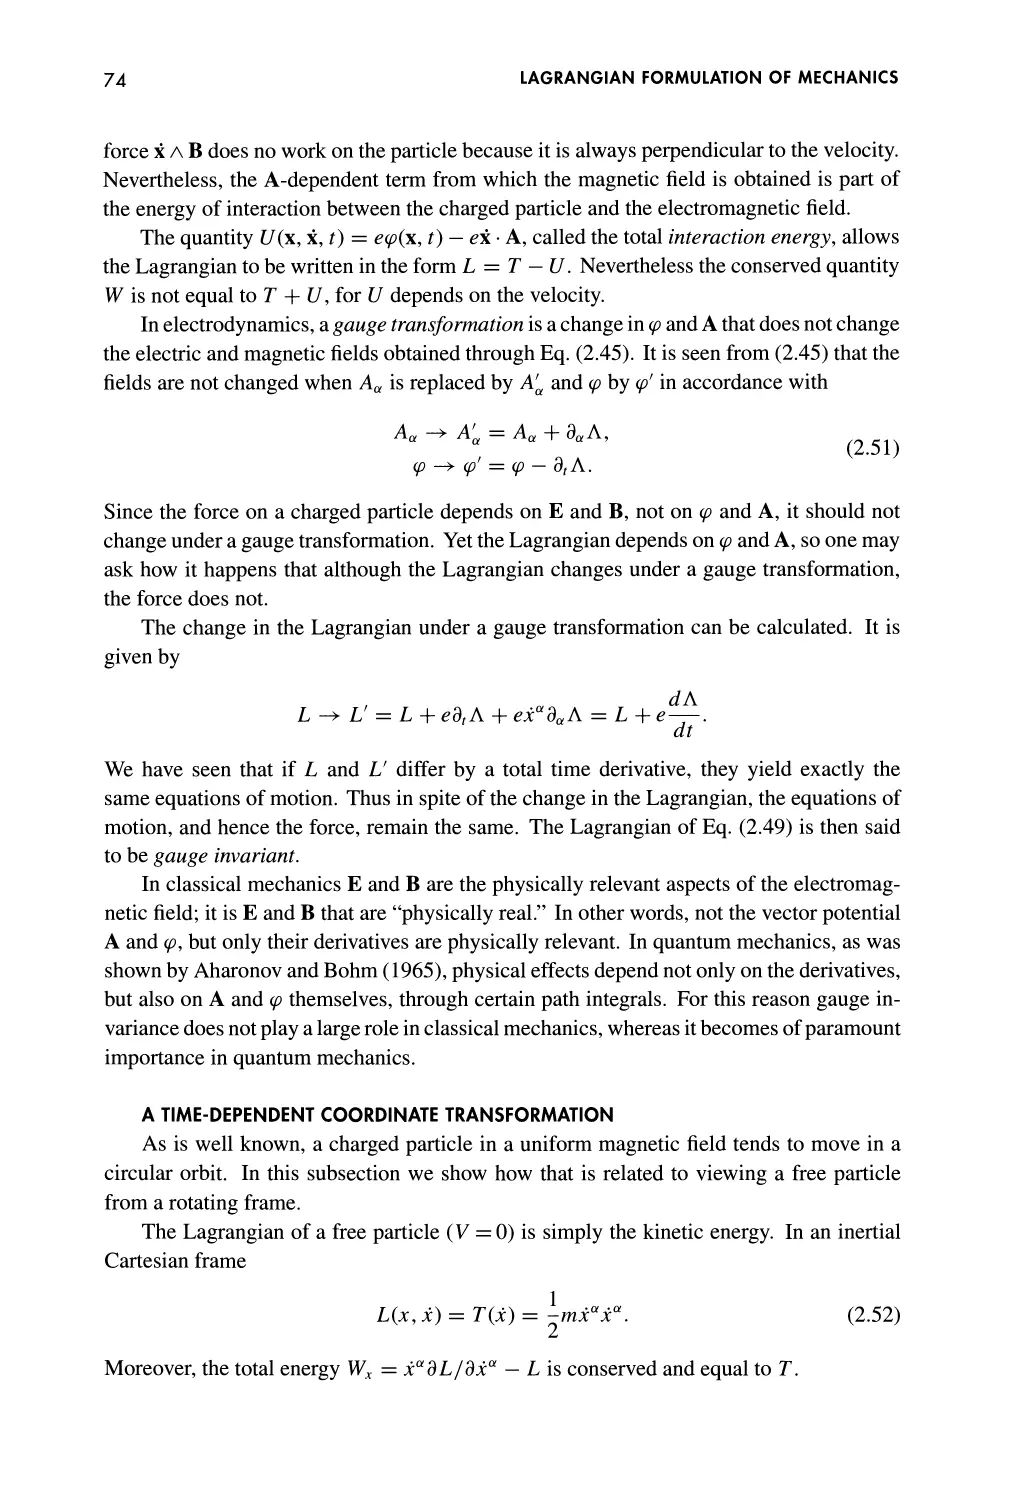 A Time-Dependent Coordinate Transformation